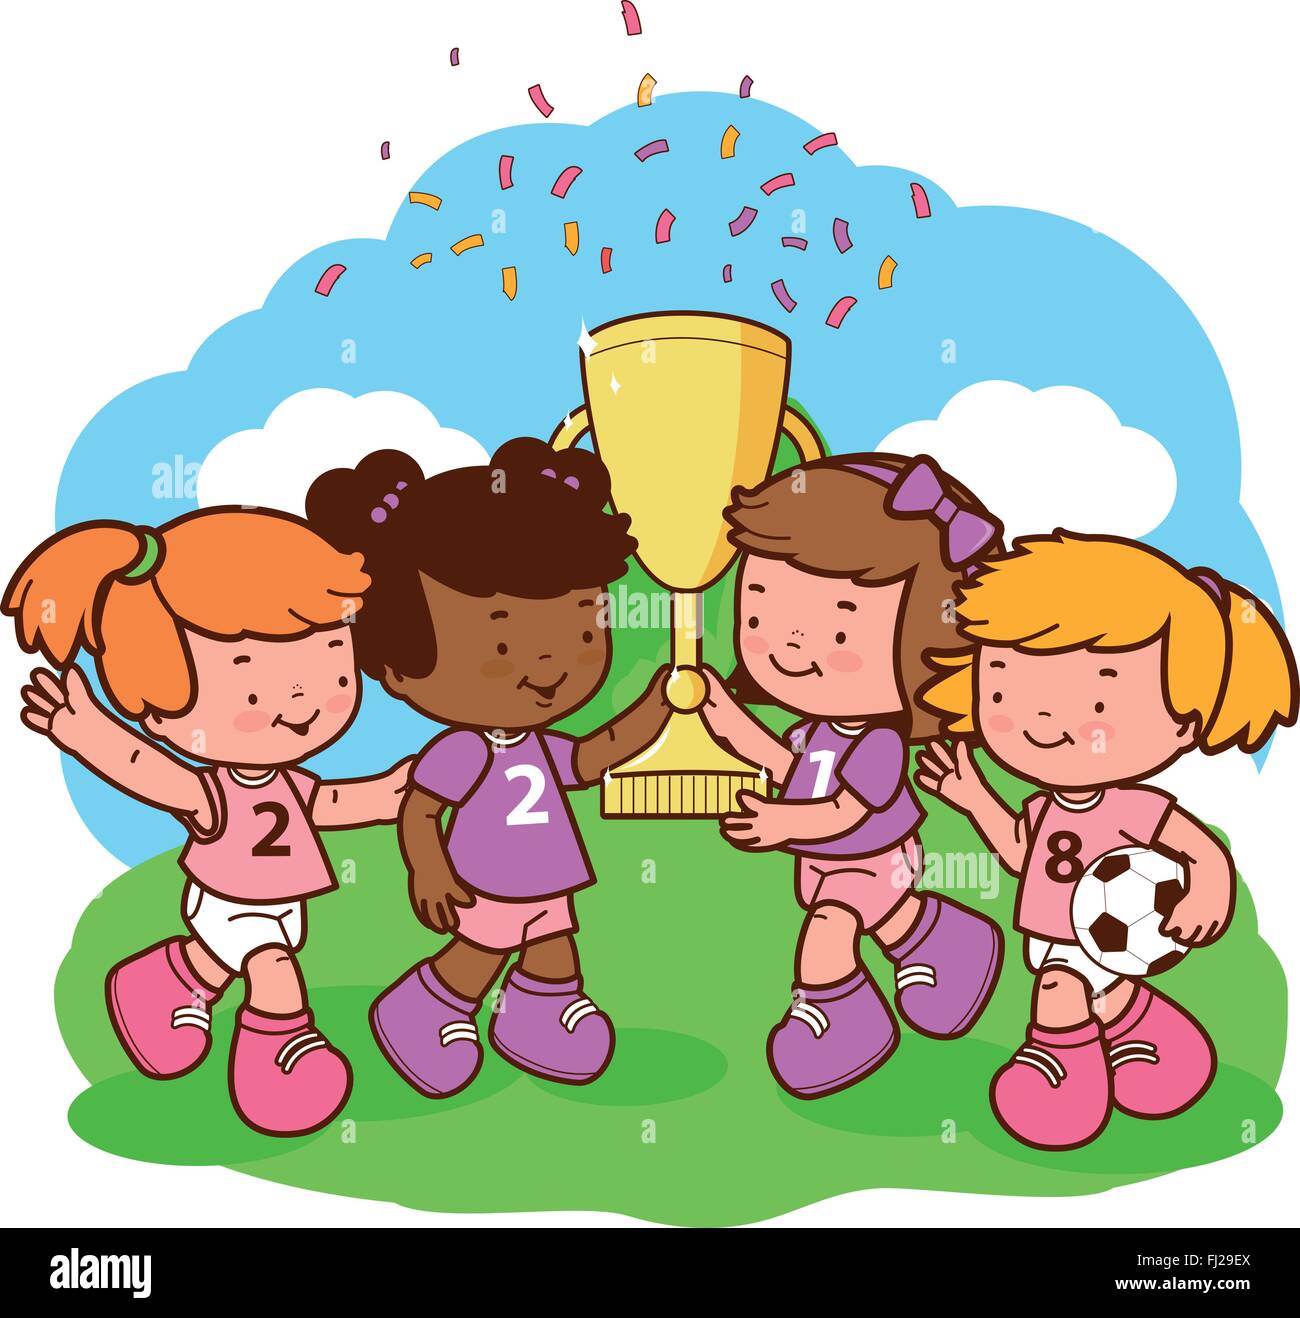 Girls soccer players champions holding trophy. Stock Vector